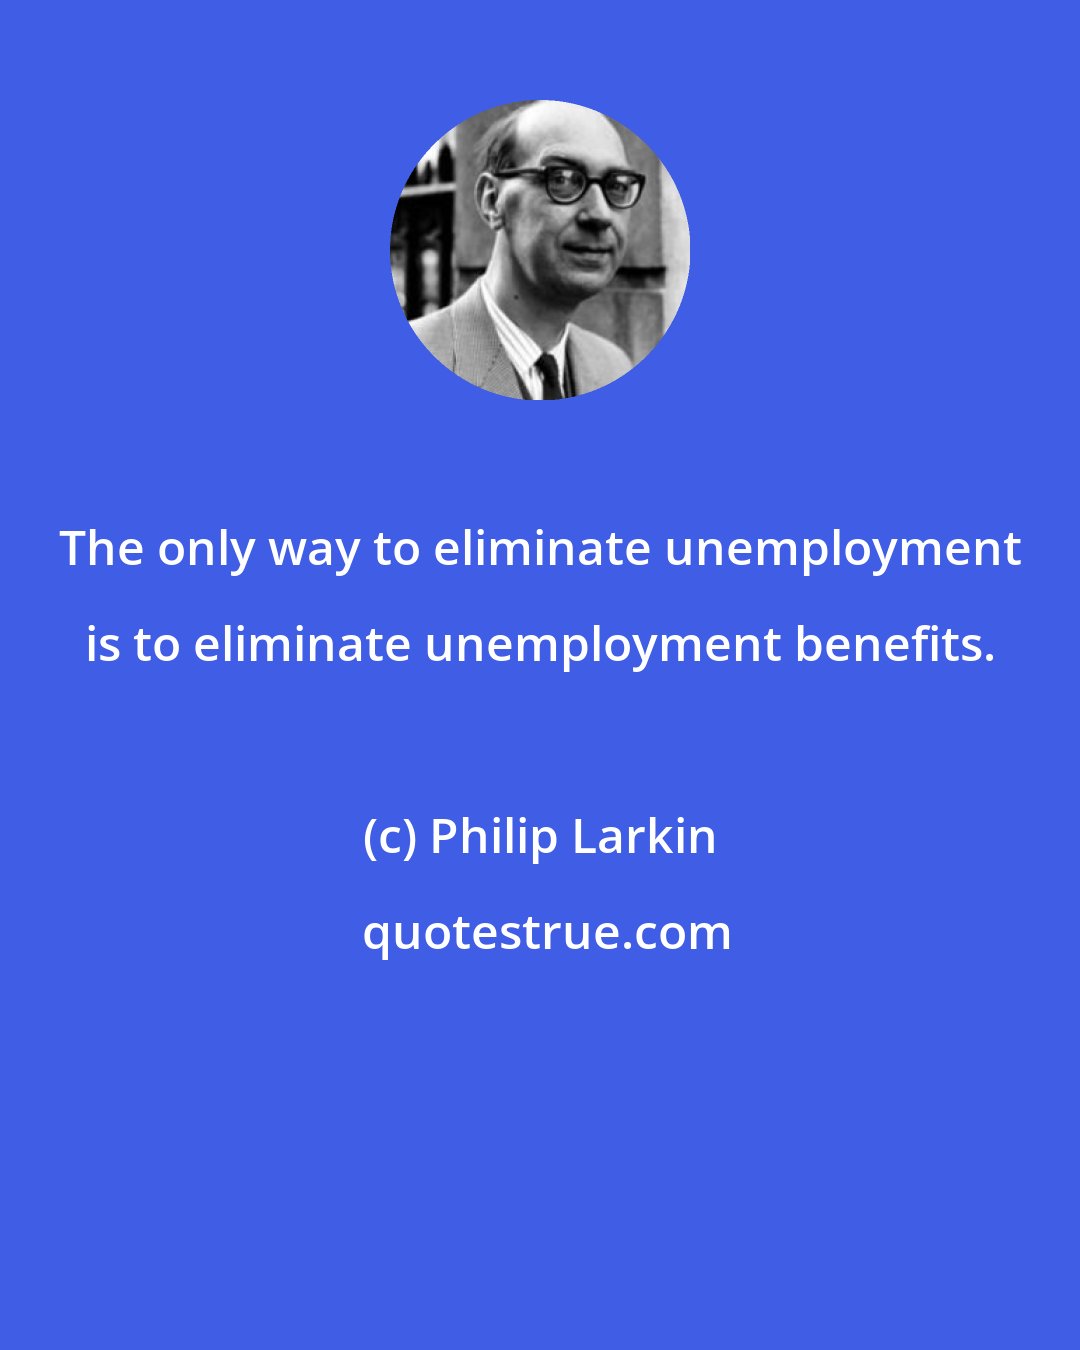 Philip Larkin: The only way to eliminate unemployment is to eliminate unemployment benefits.